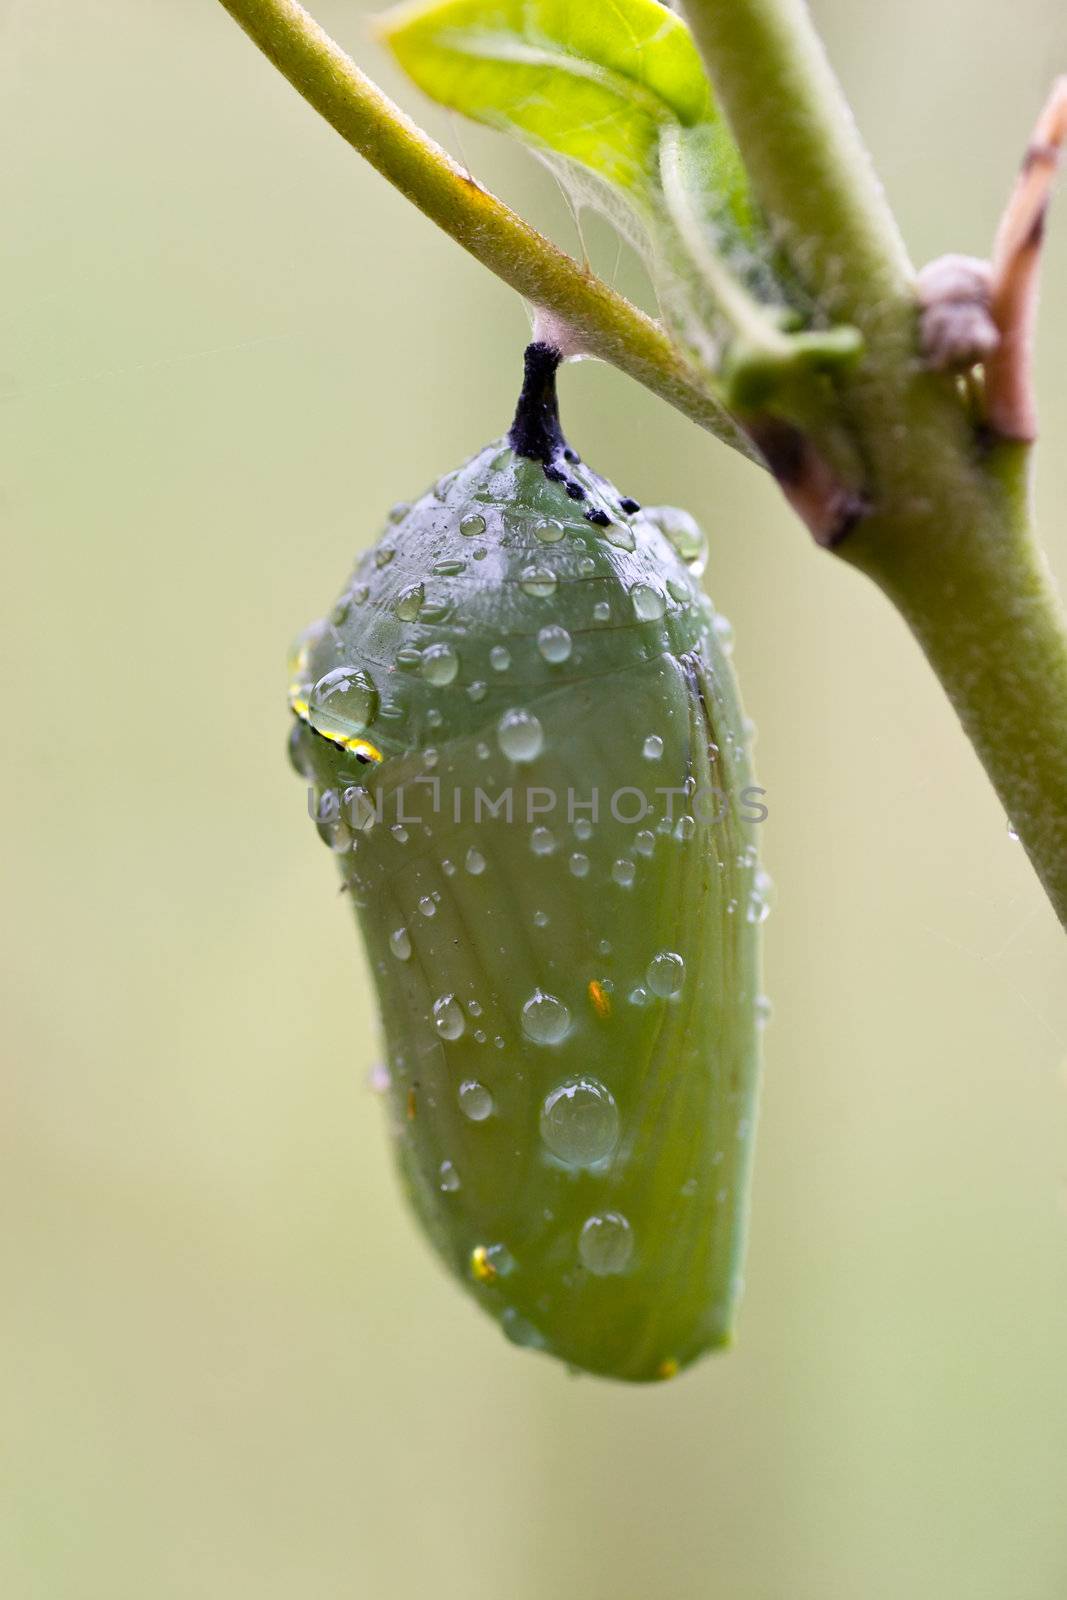 Early morning dew drops rest on a monach butterfly crysalis